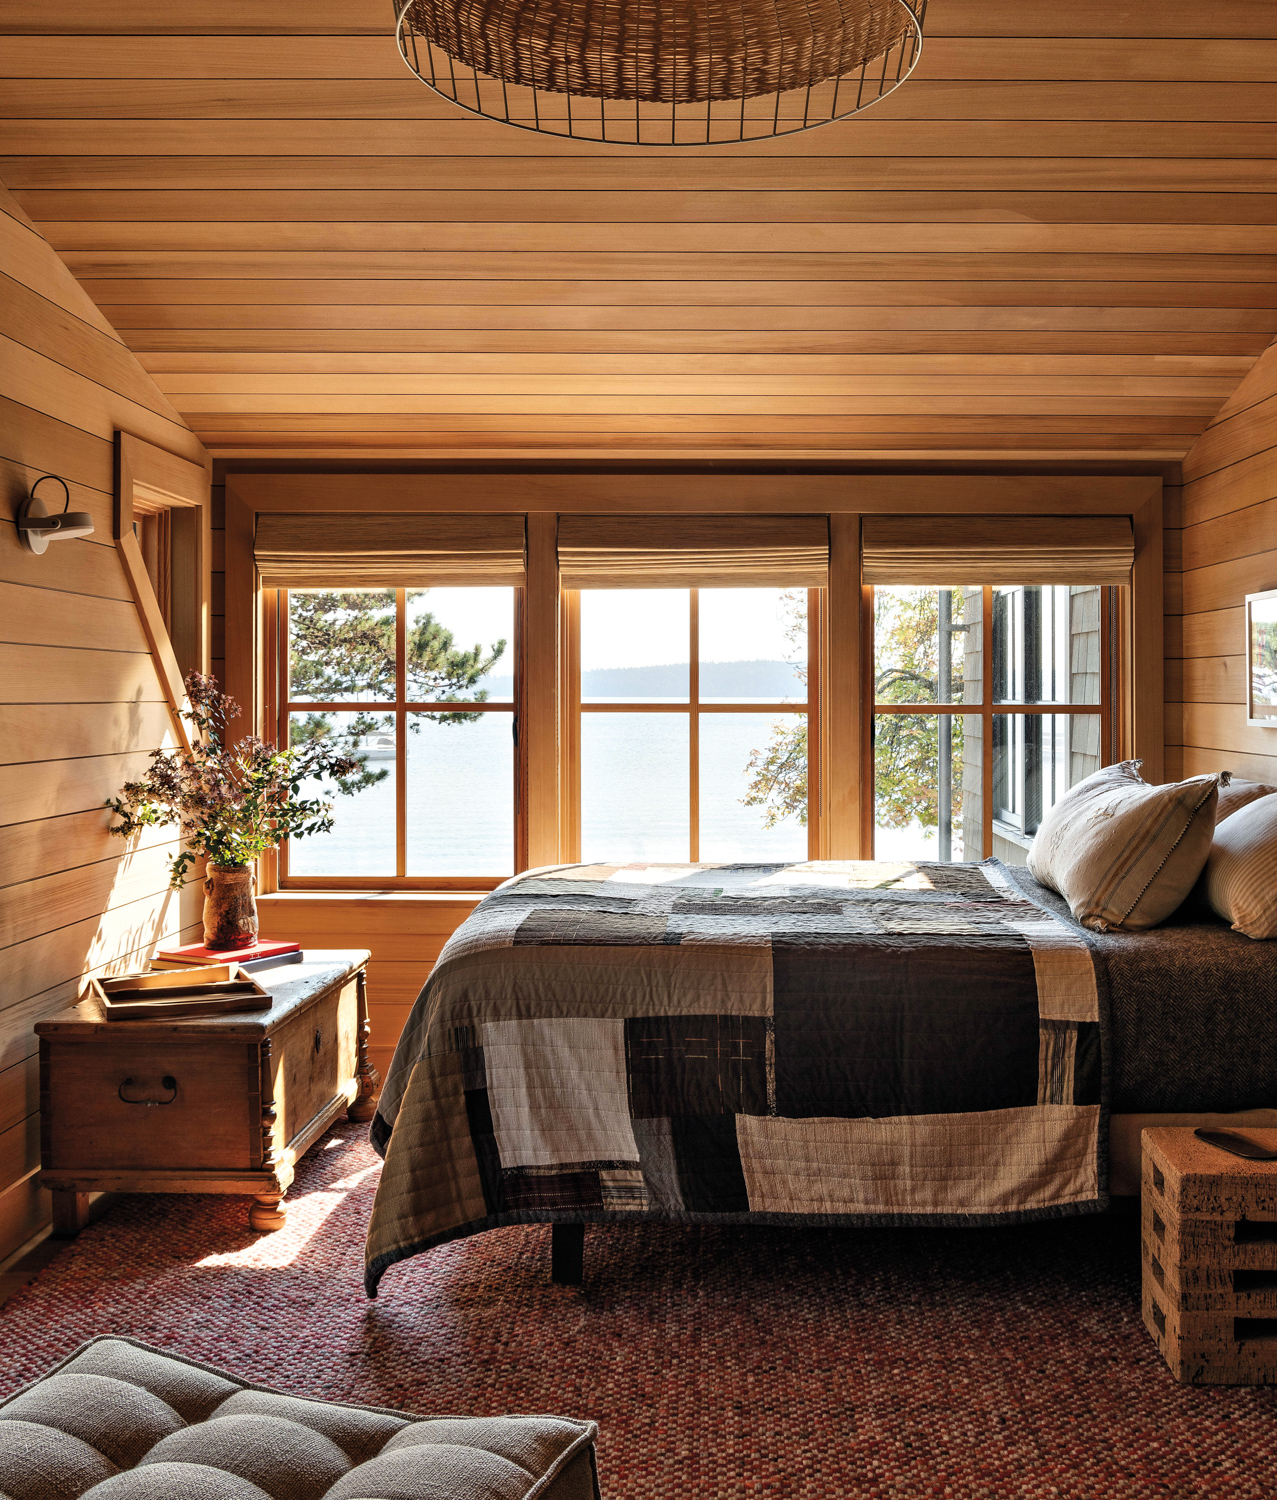 A rustic bedroom lined with...